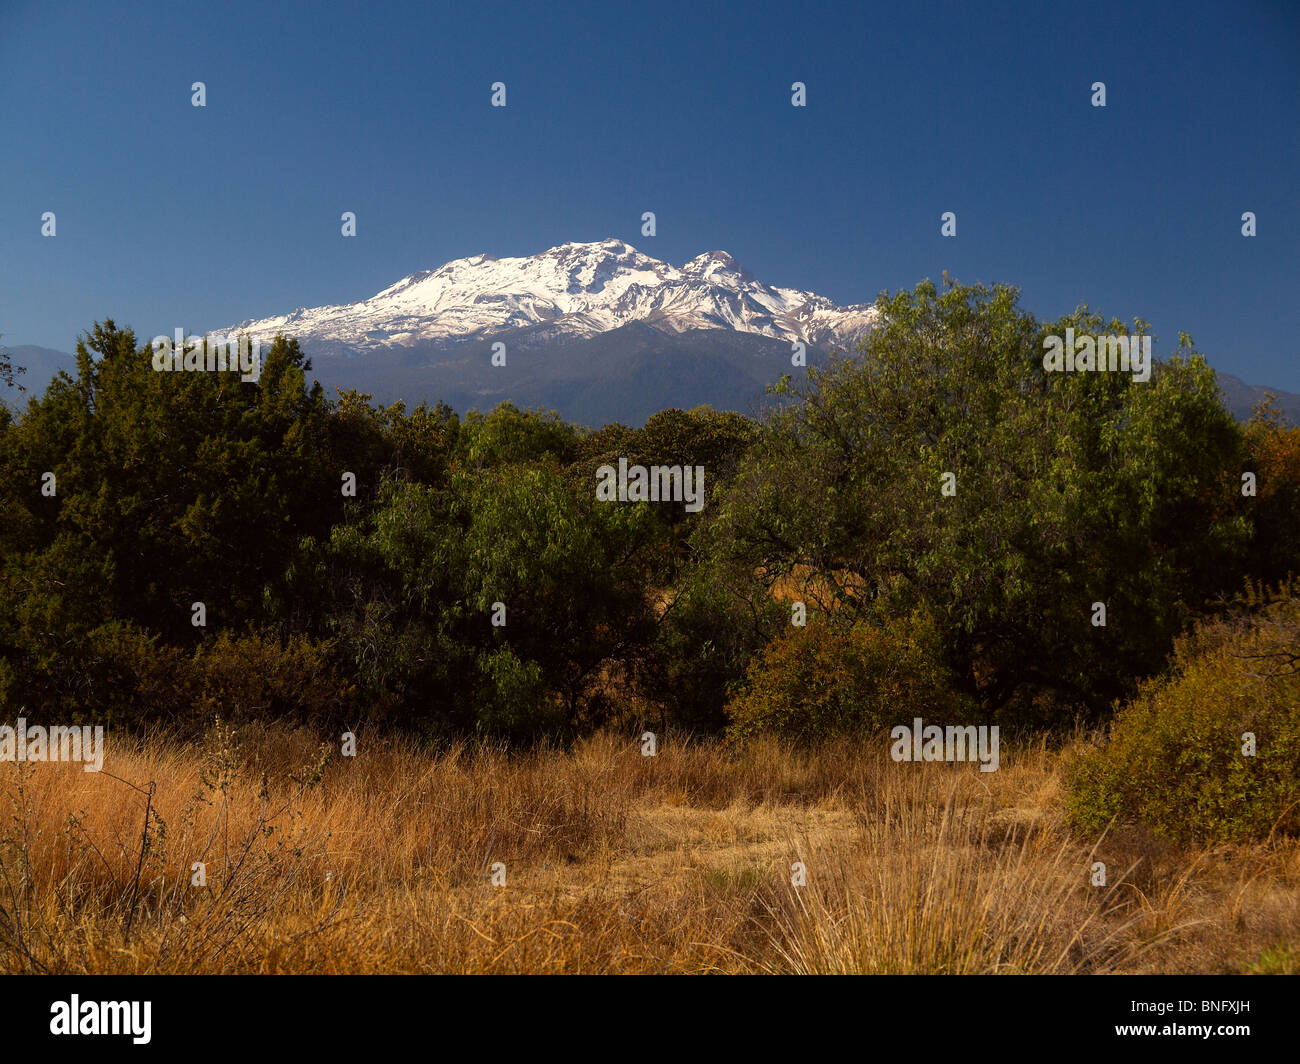 View of snow-capped volcano Iztaccíhuatl in Mexico during the dry season Stock Photo